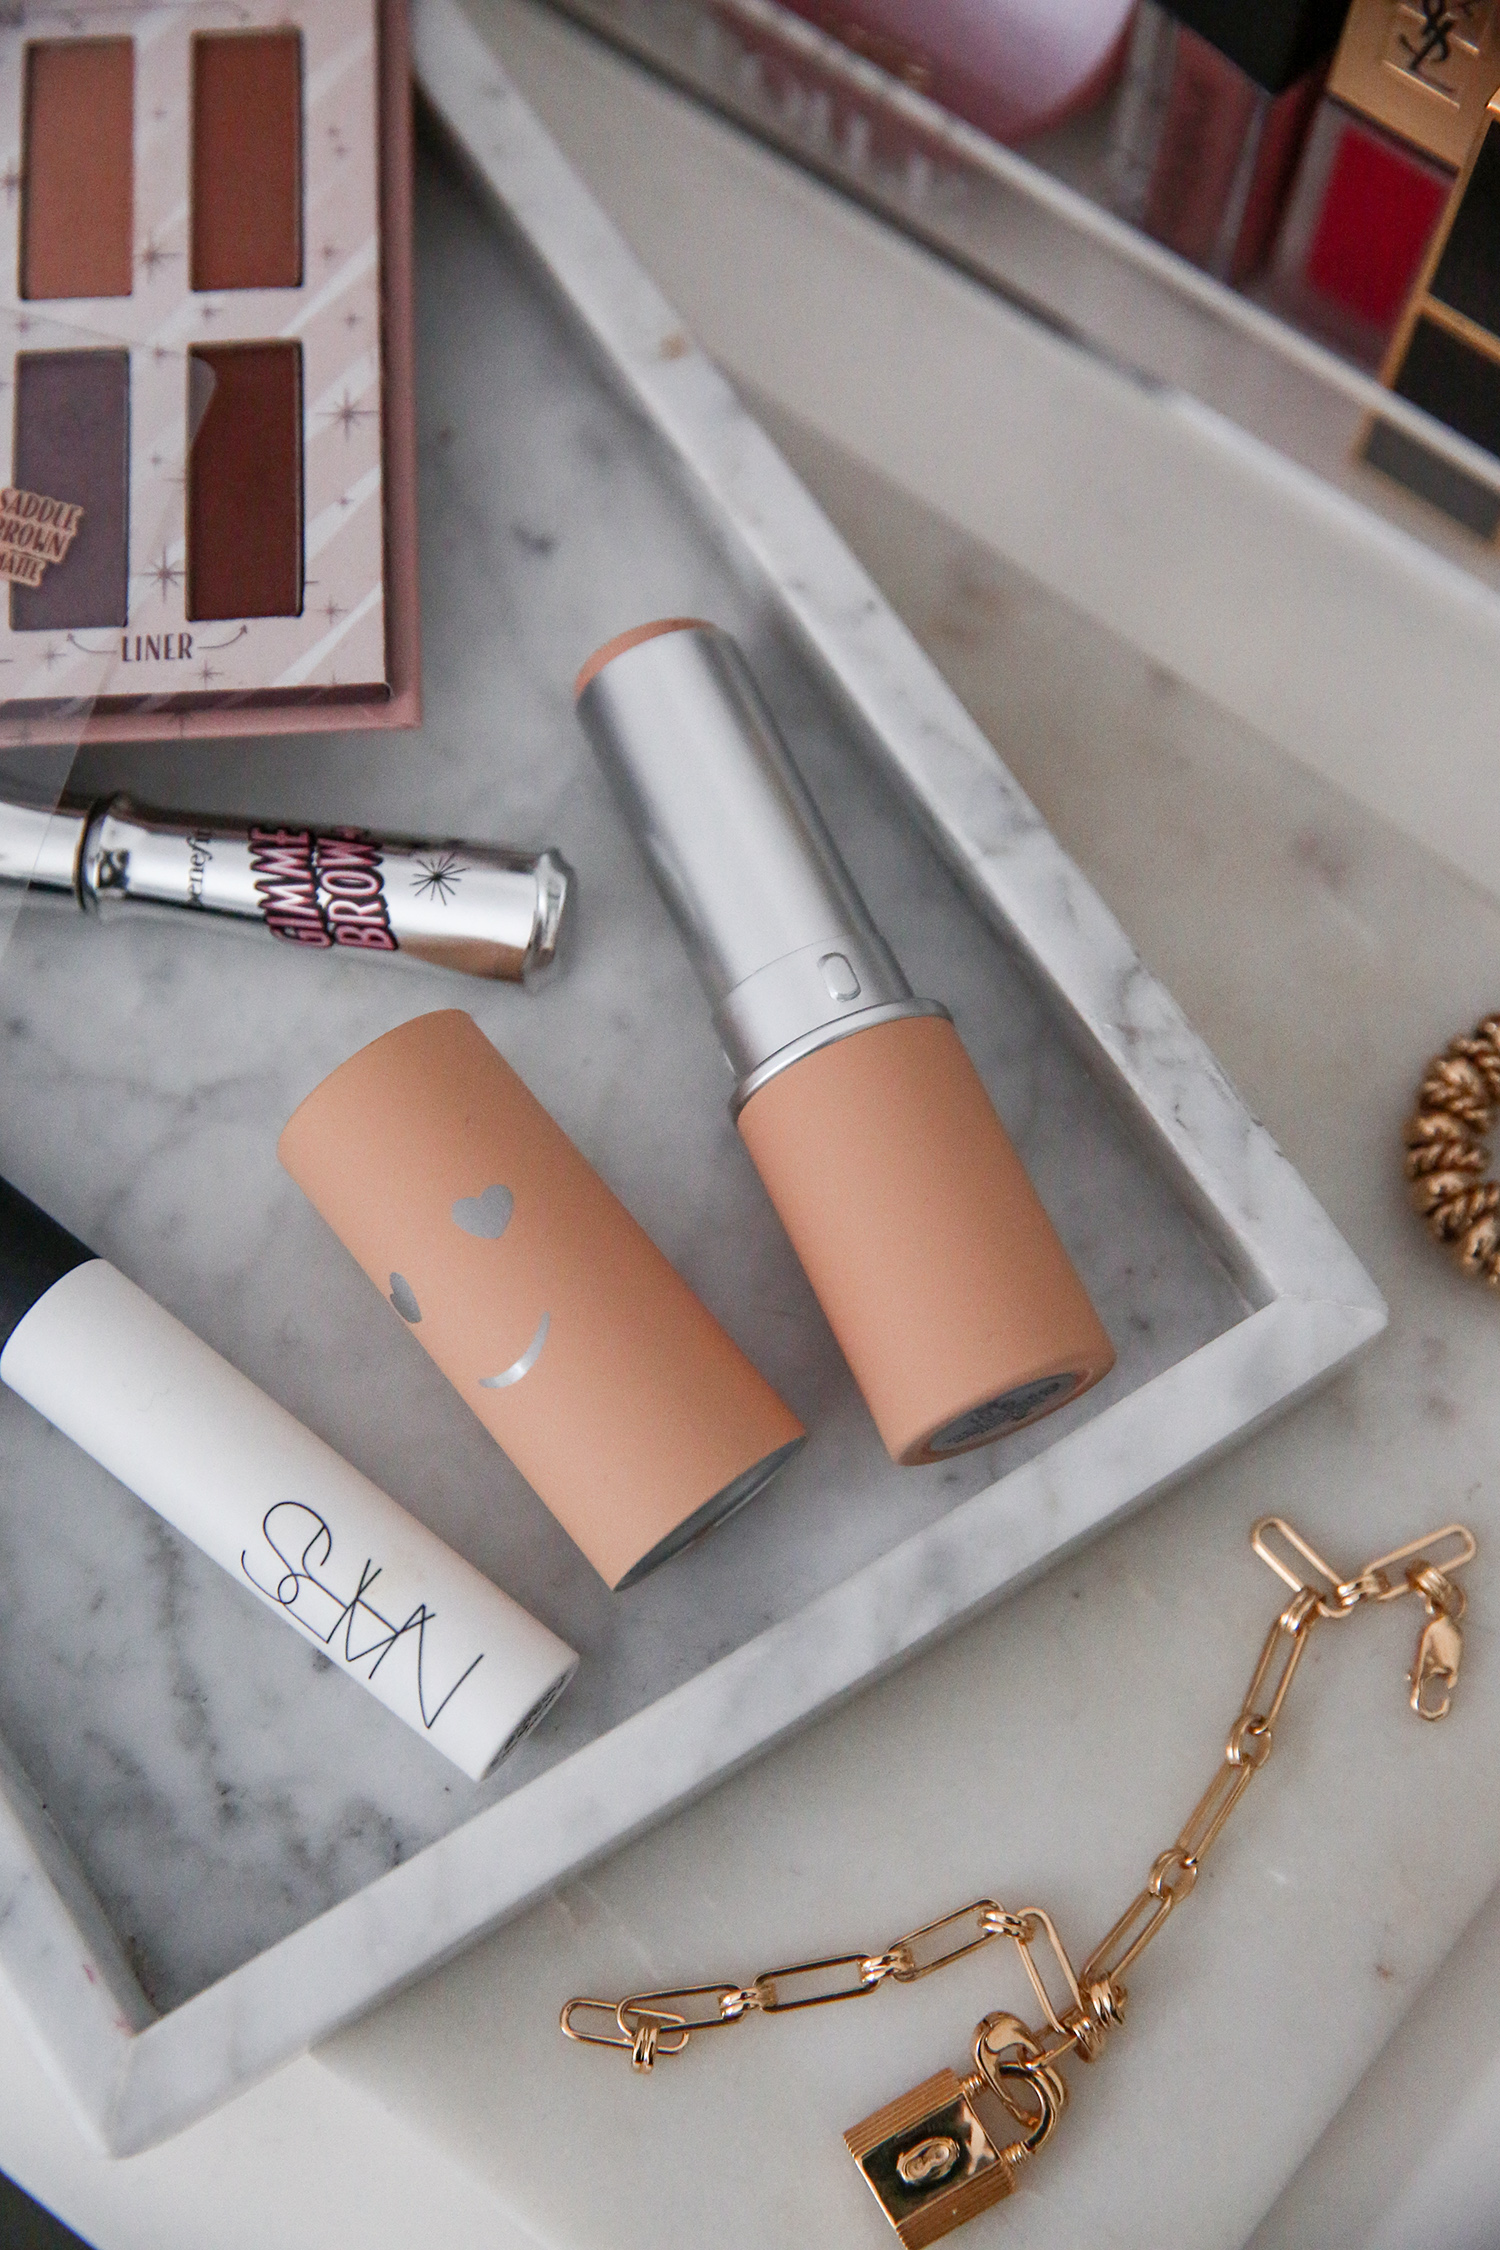 enefit Hello Happy Air Stick Foundation Review